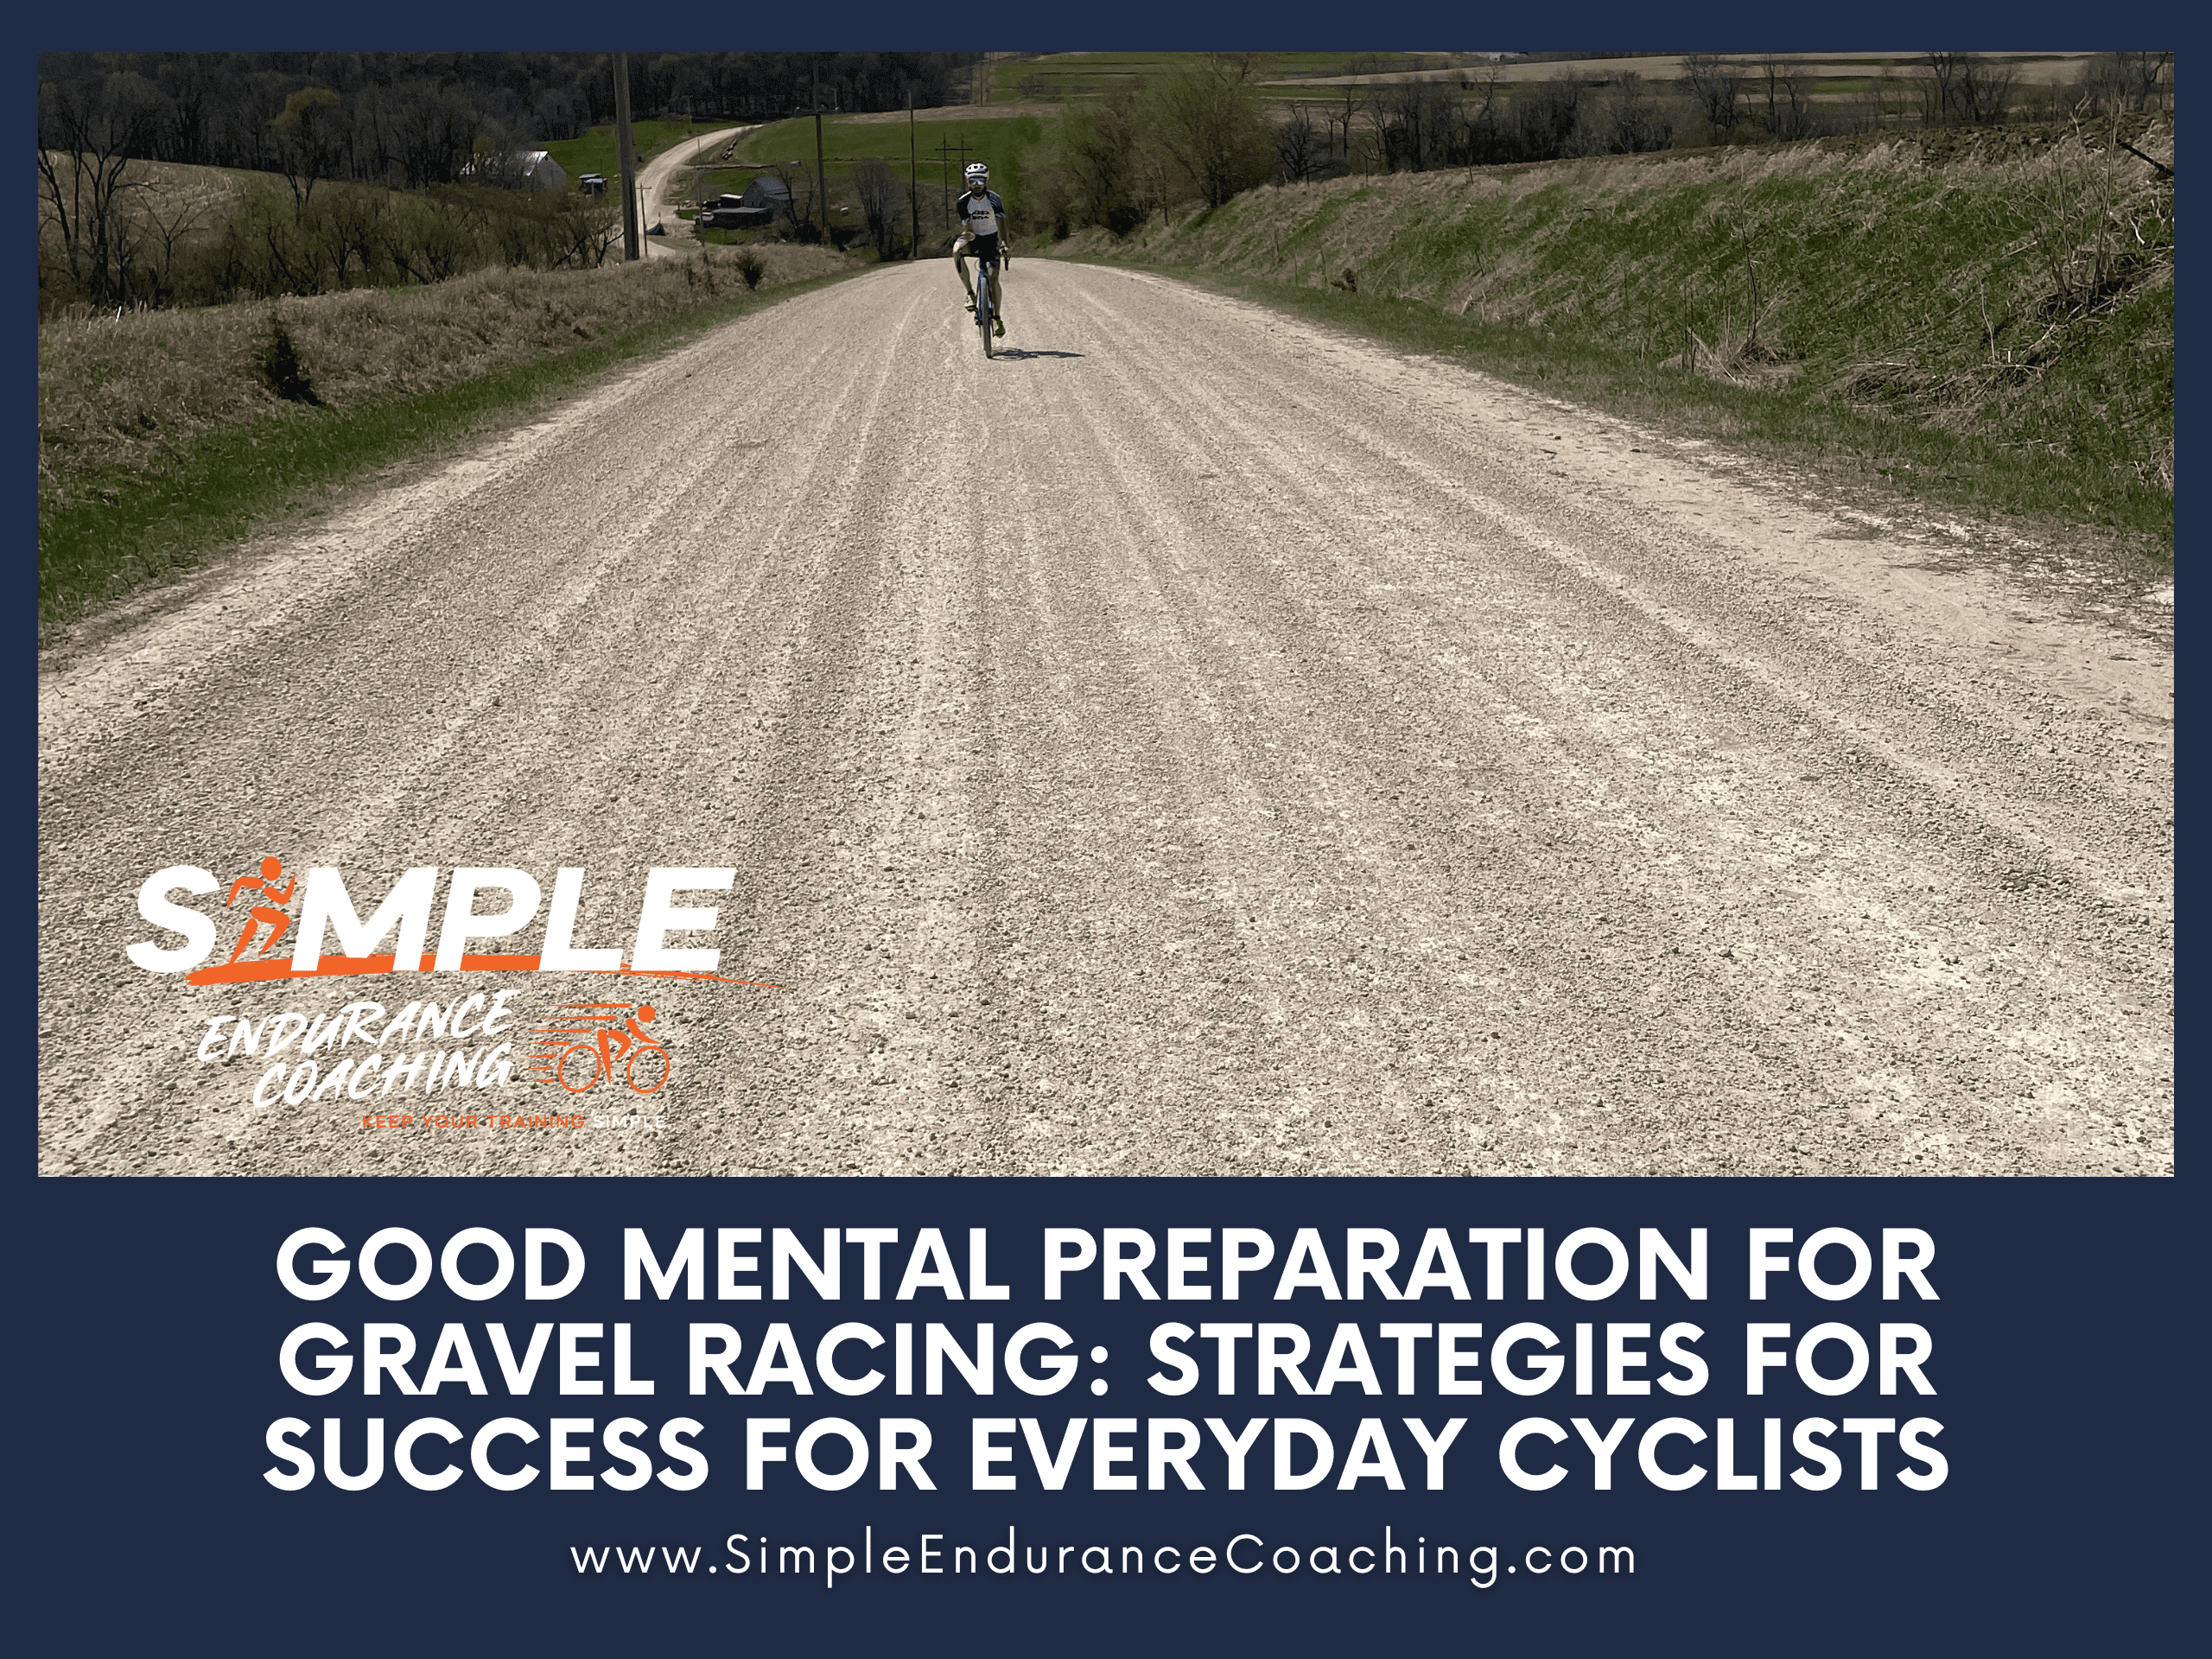 Gravel racing is becoming a popular event among everyday cyclists. It's also a great way to test your mental endurance skills under tough conditions.